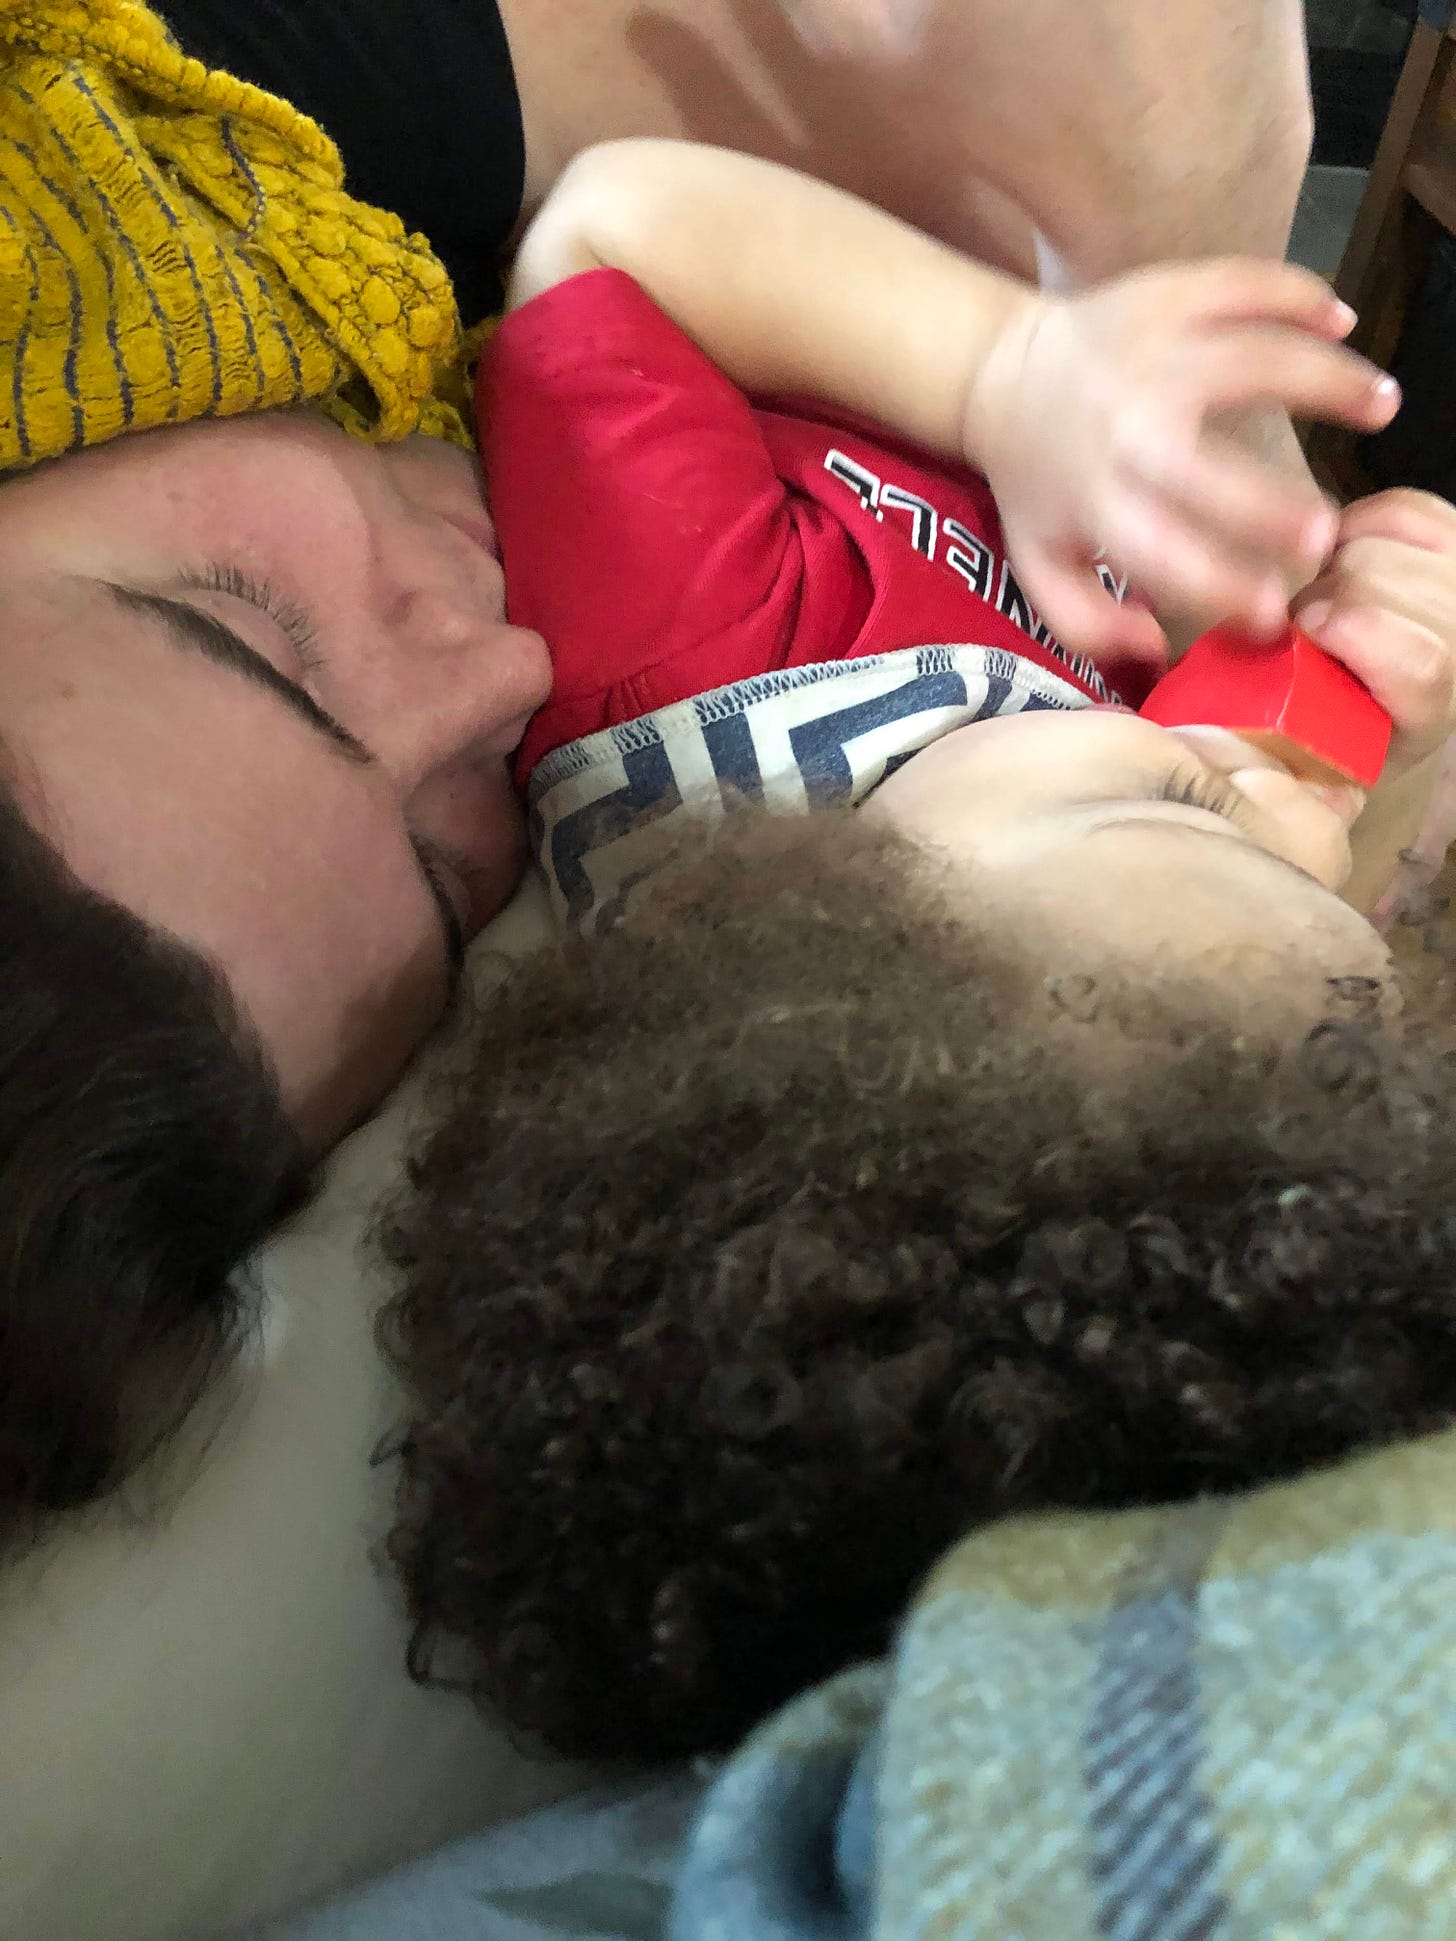 a white man with long hair snuggles his not-quite-two-year-old biracial child, who is wearing a Grinnell College shirt and blue-and-white bib